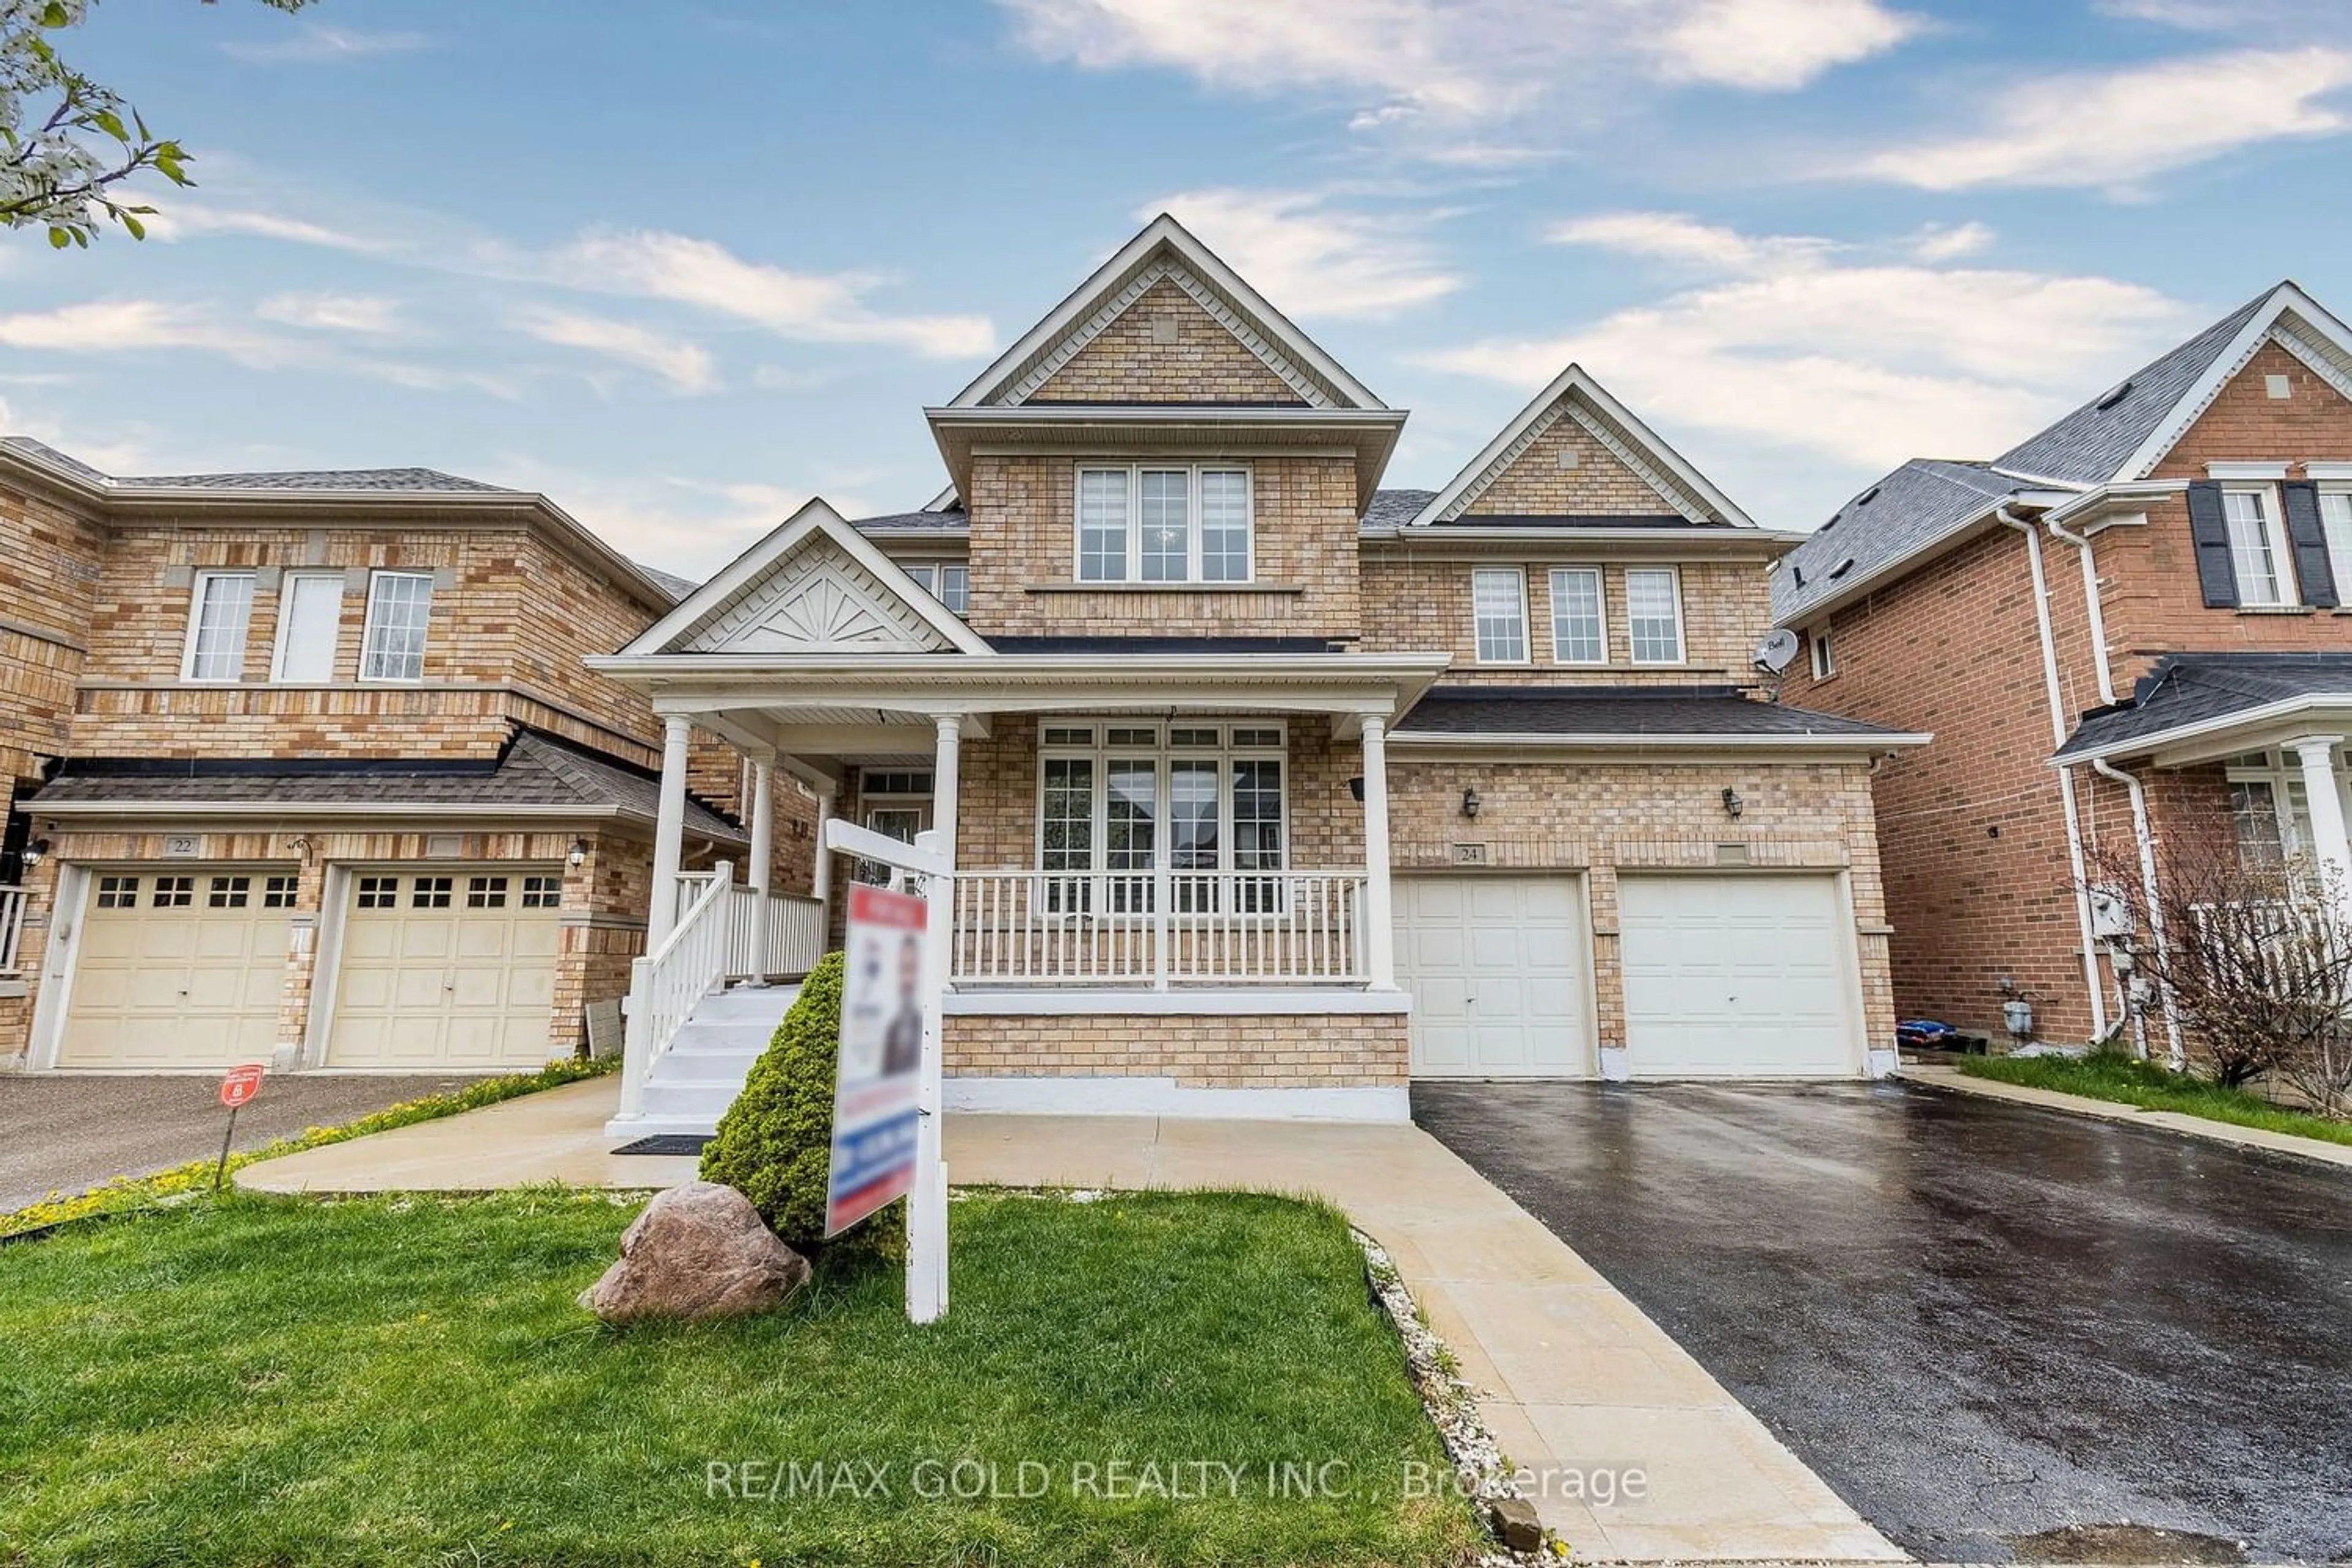 Home with brick exterior material for 24 Cloverlawn St, Brampton Ontario L7A 3X5